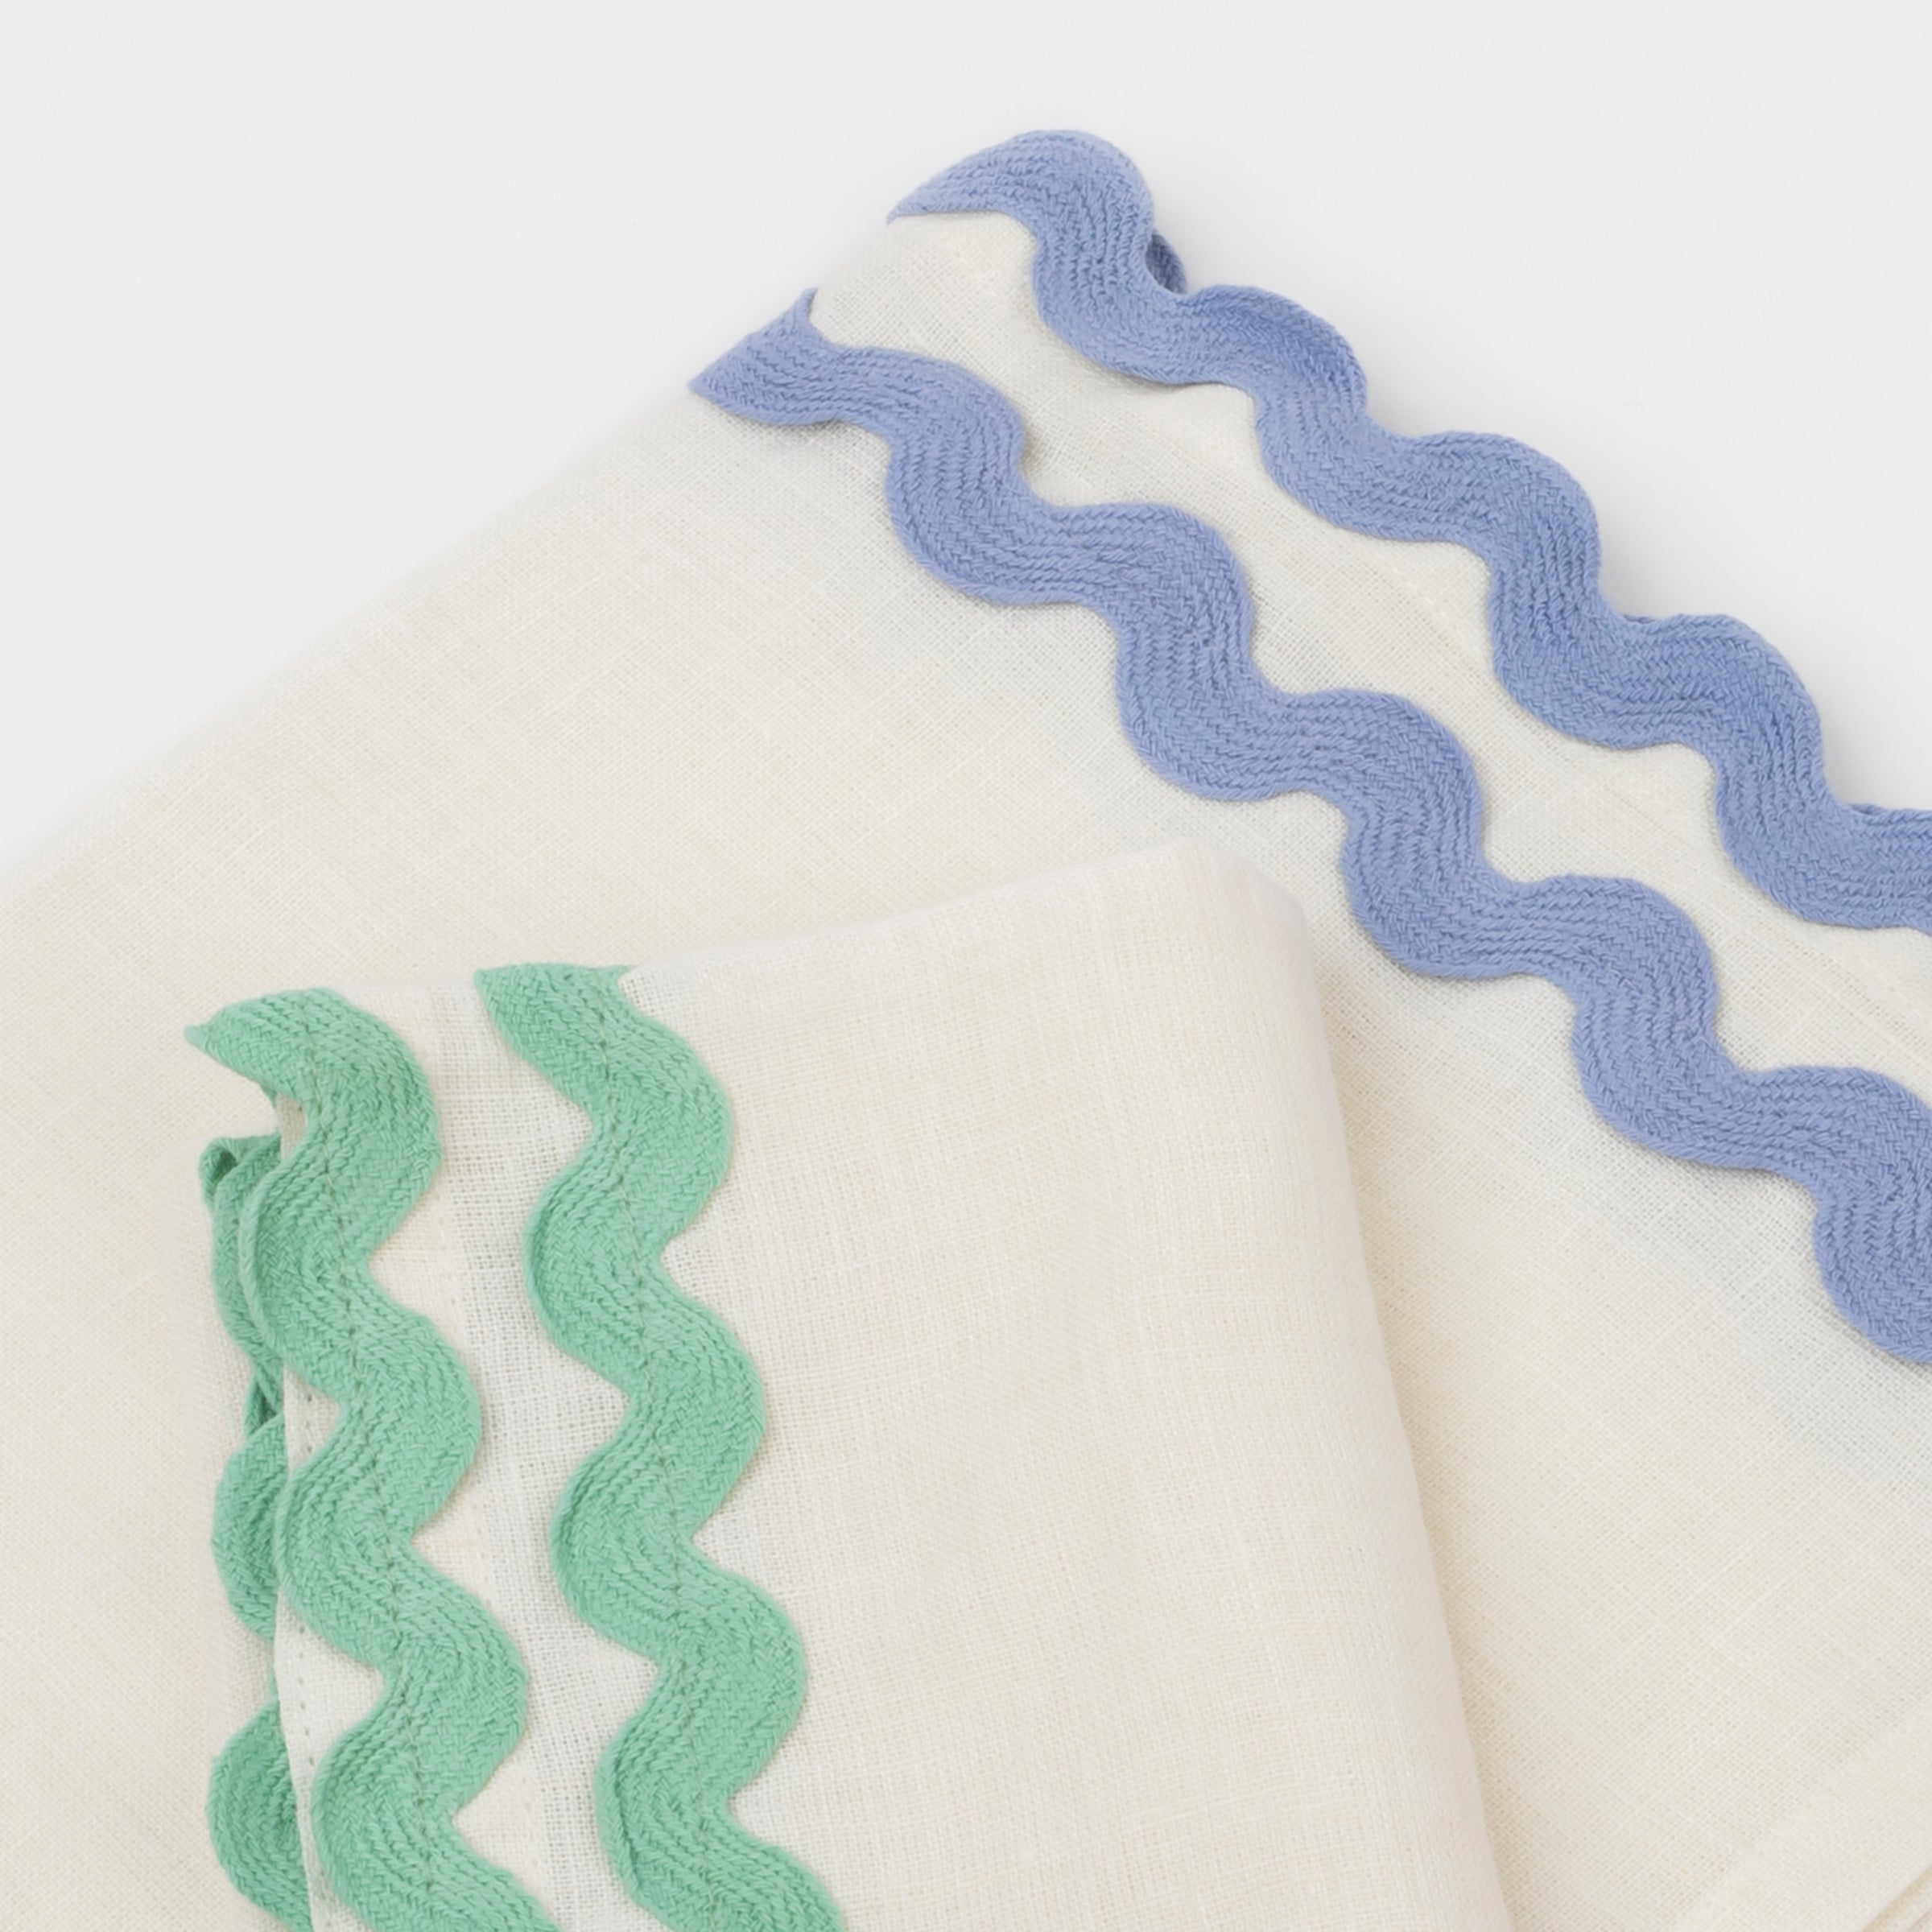 Our linen napkins are designed as reusable napkins, and have ric rac details.